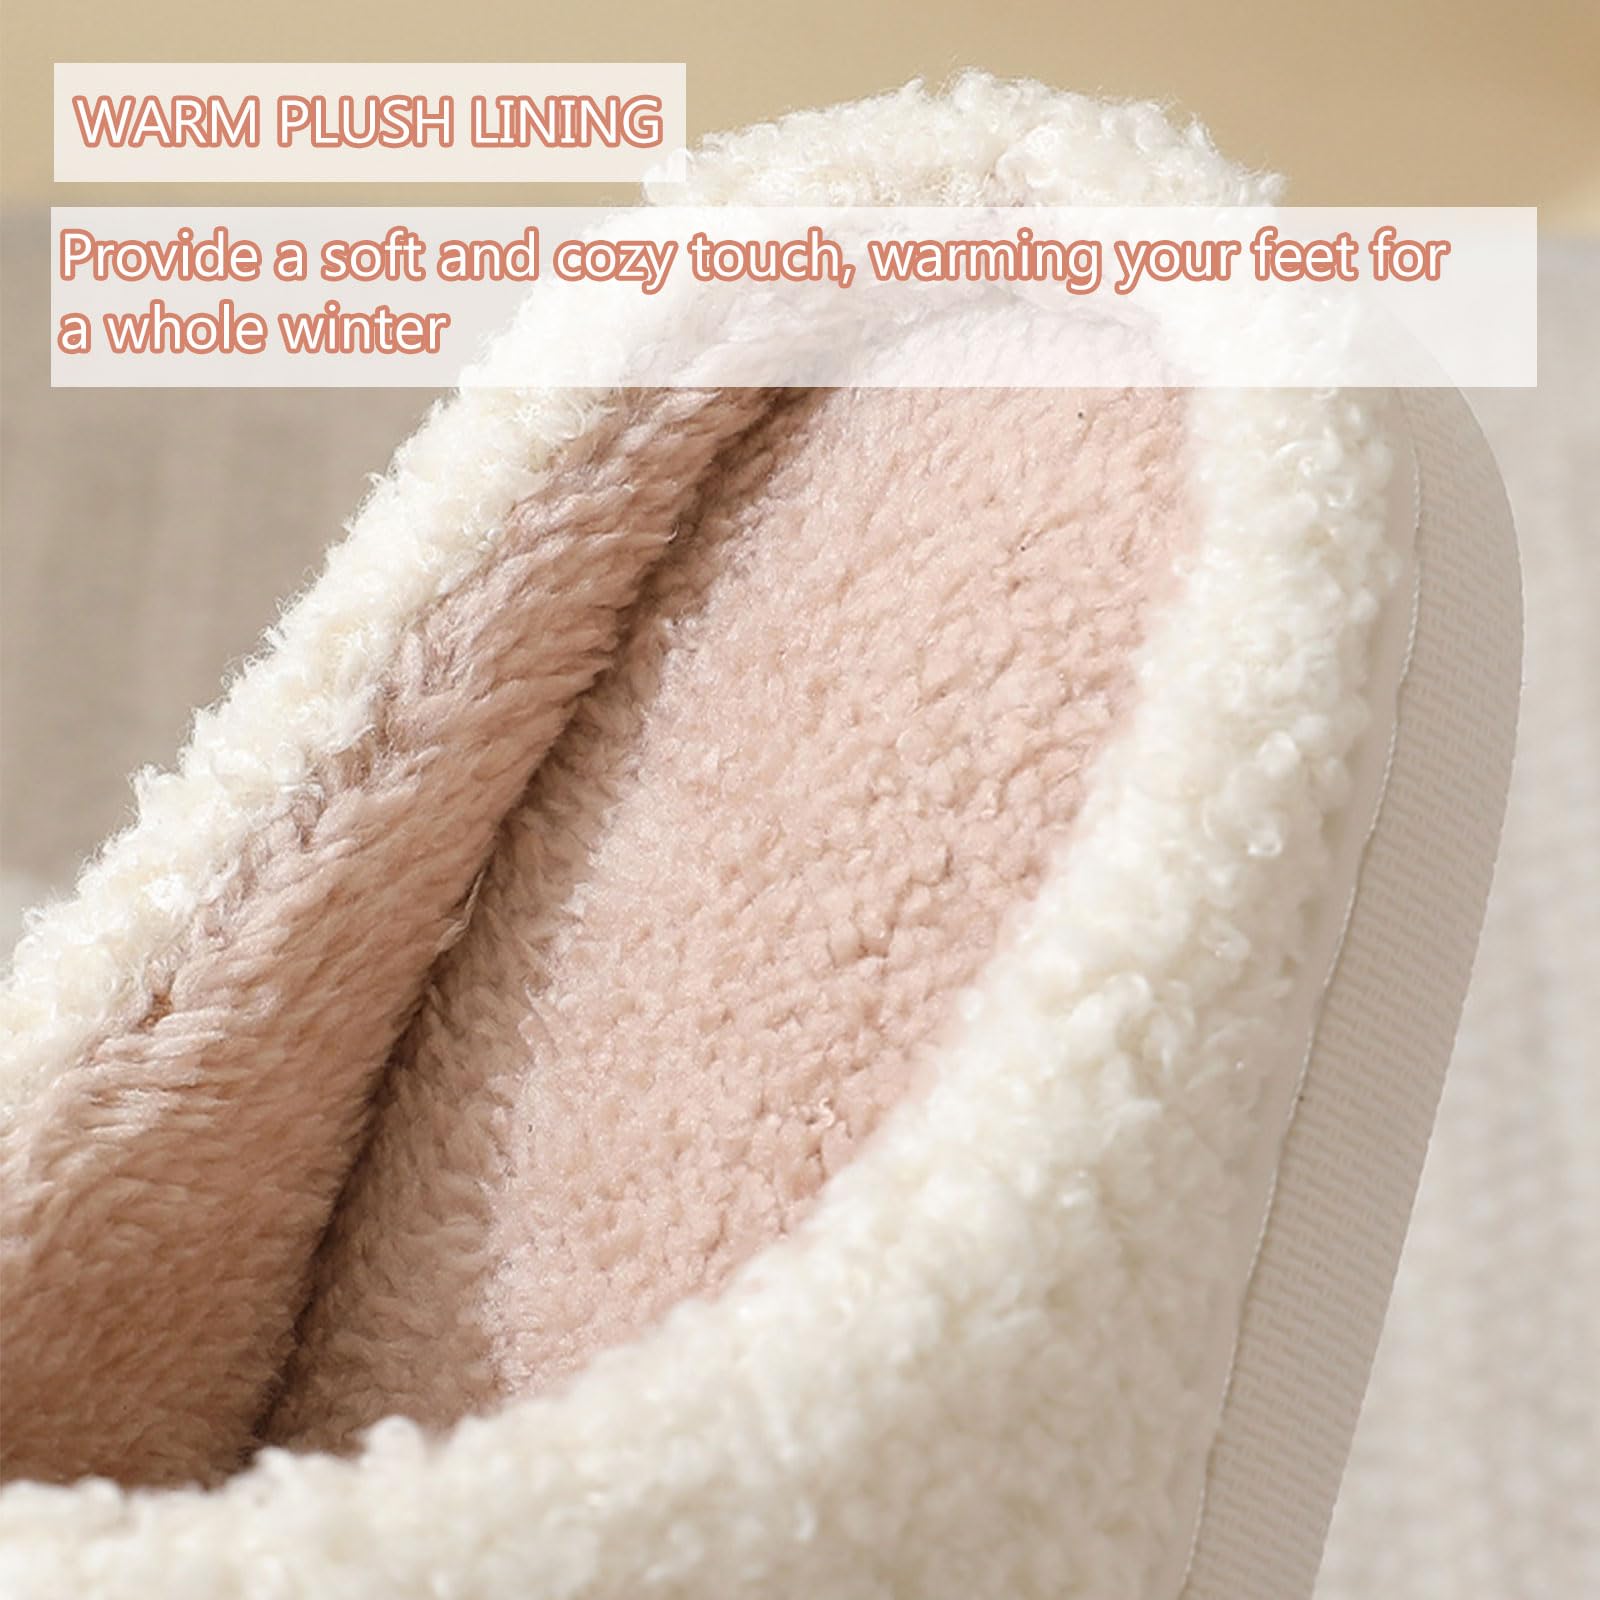 V OPXIN Meet Me At Midnight Slippers for Womens Mens Cute Slippers Cozy Plush Fuzzy Cushion Fluffy Soft Warm Slip-on House Slippers for Indoor and Outdoor Strawberry Mushroom Evil Eyes Slippers